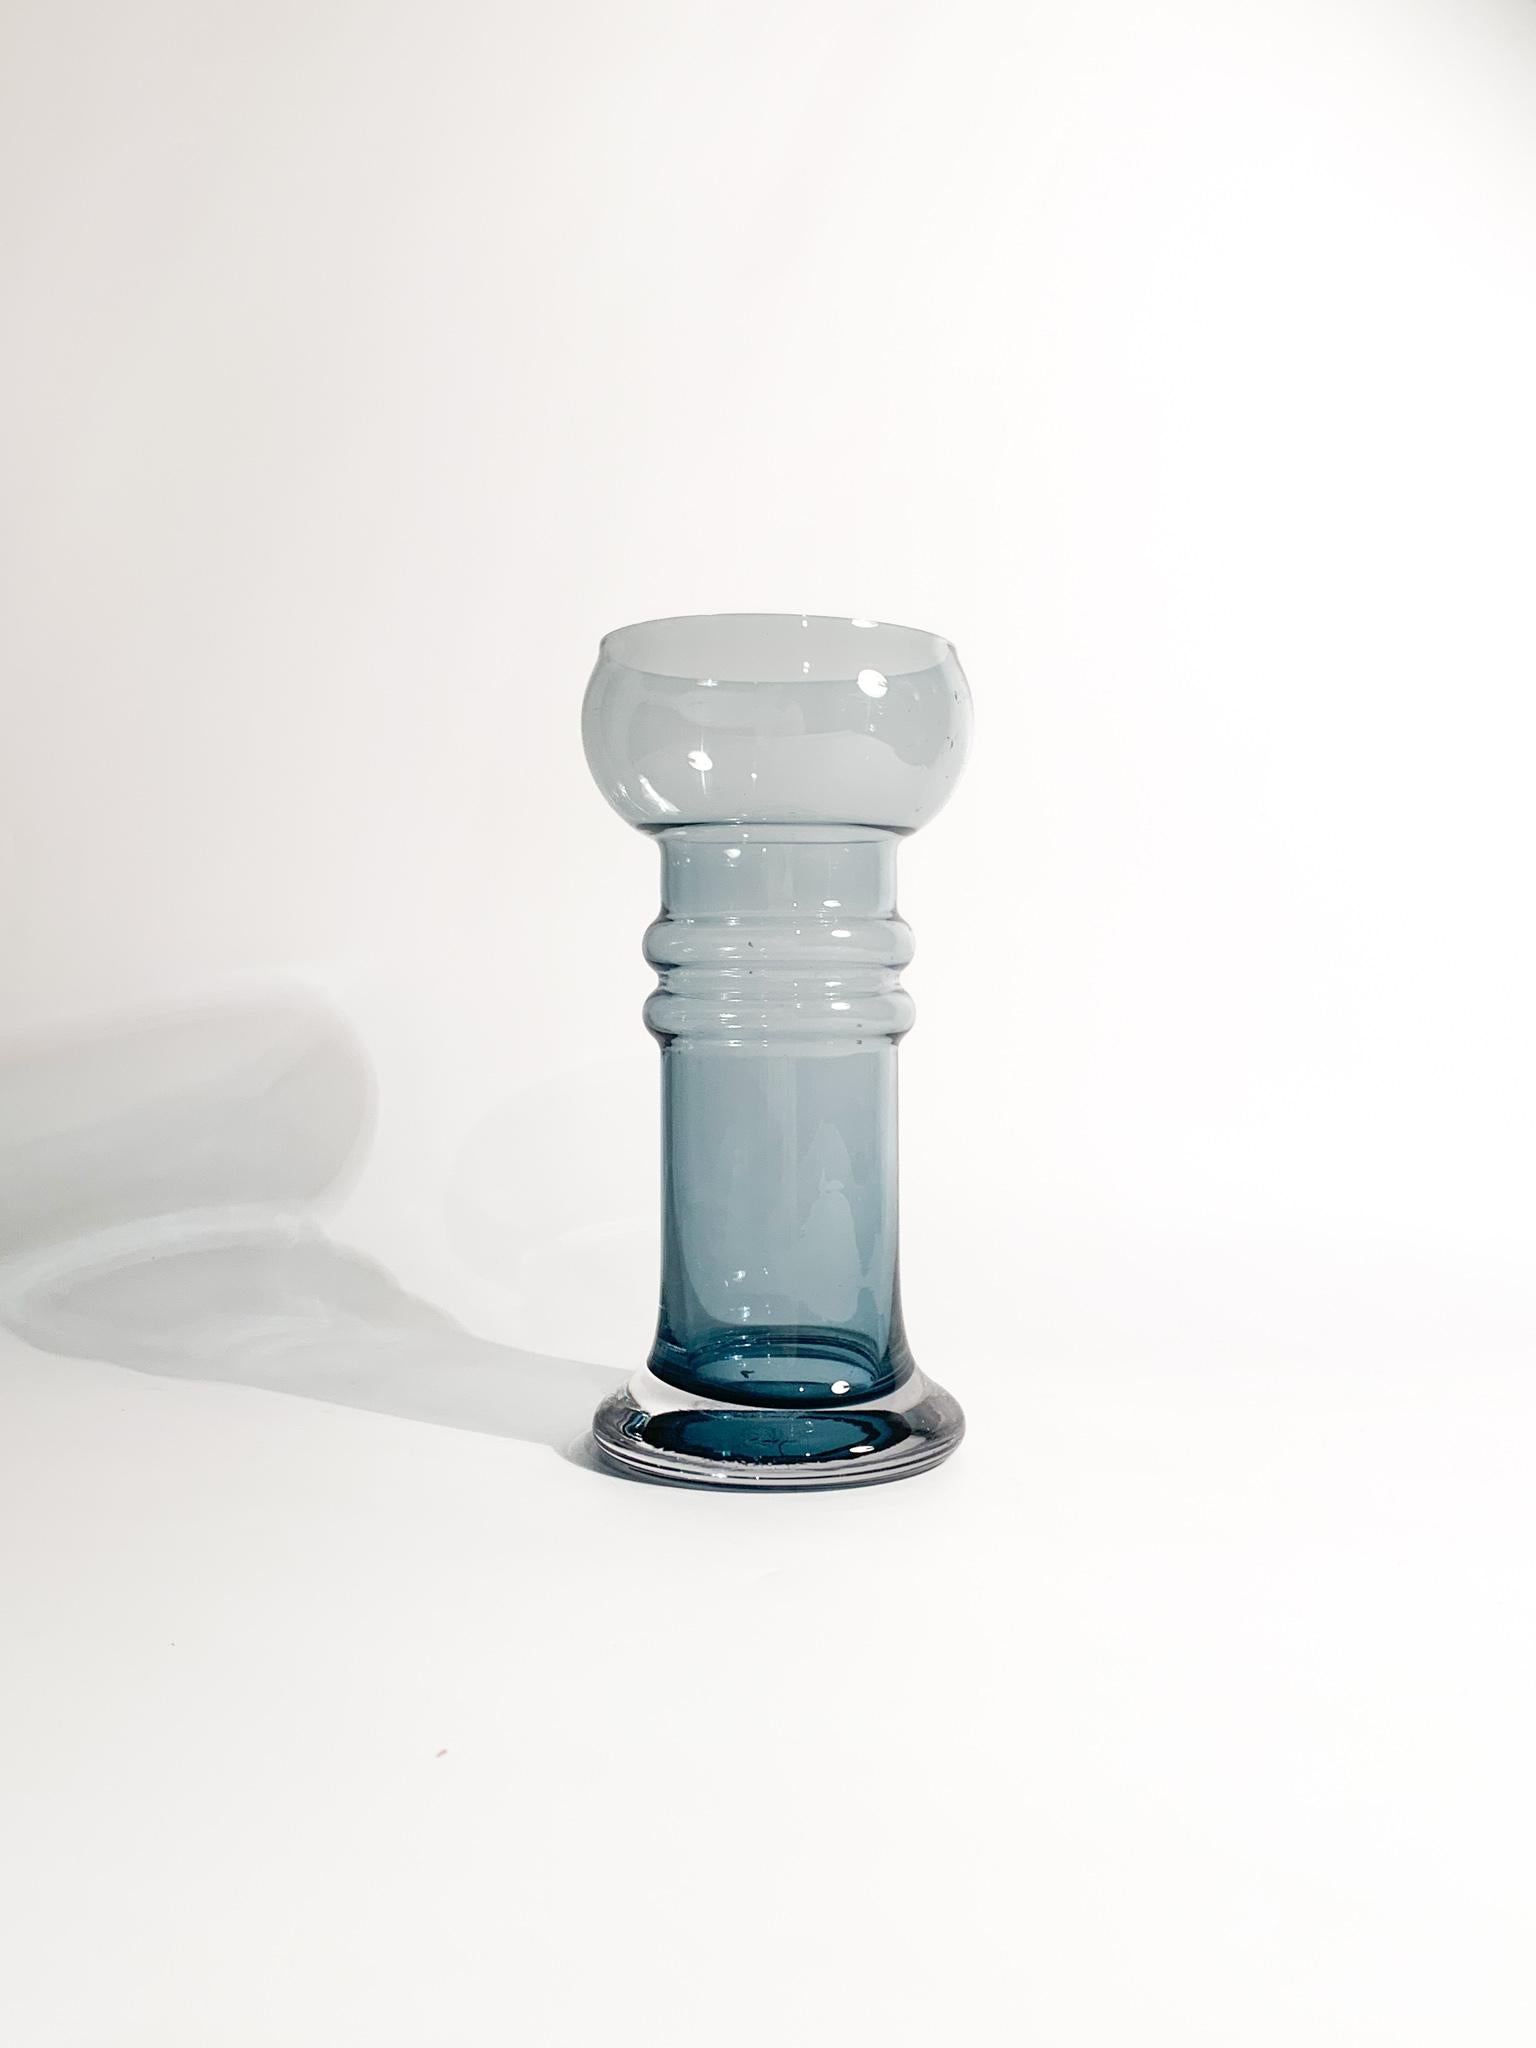 Hand-blown Finnish blue glass vase, designed by Tamara Aladin and made by Riihimäki in the 1960s

Ø 11 cm h 20 cm